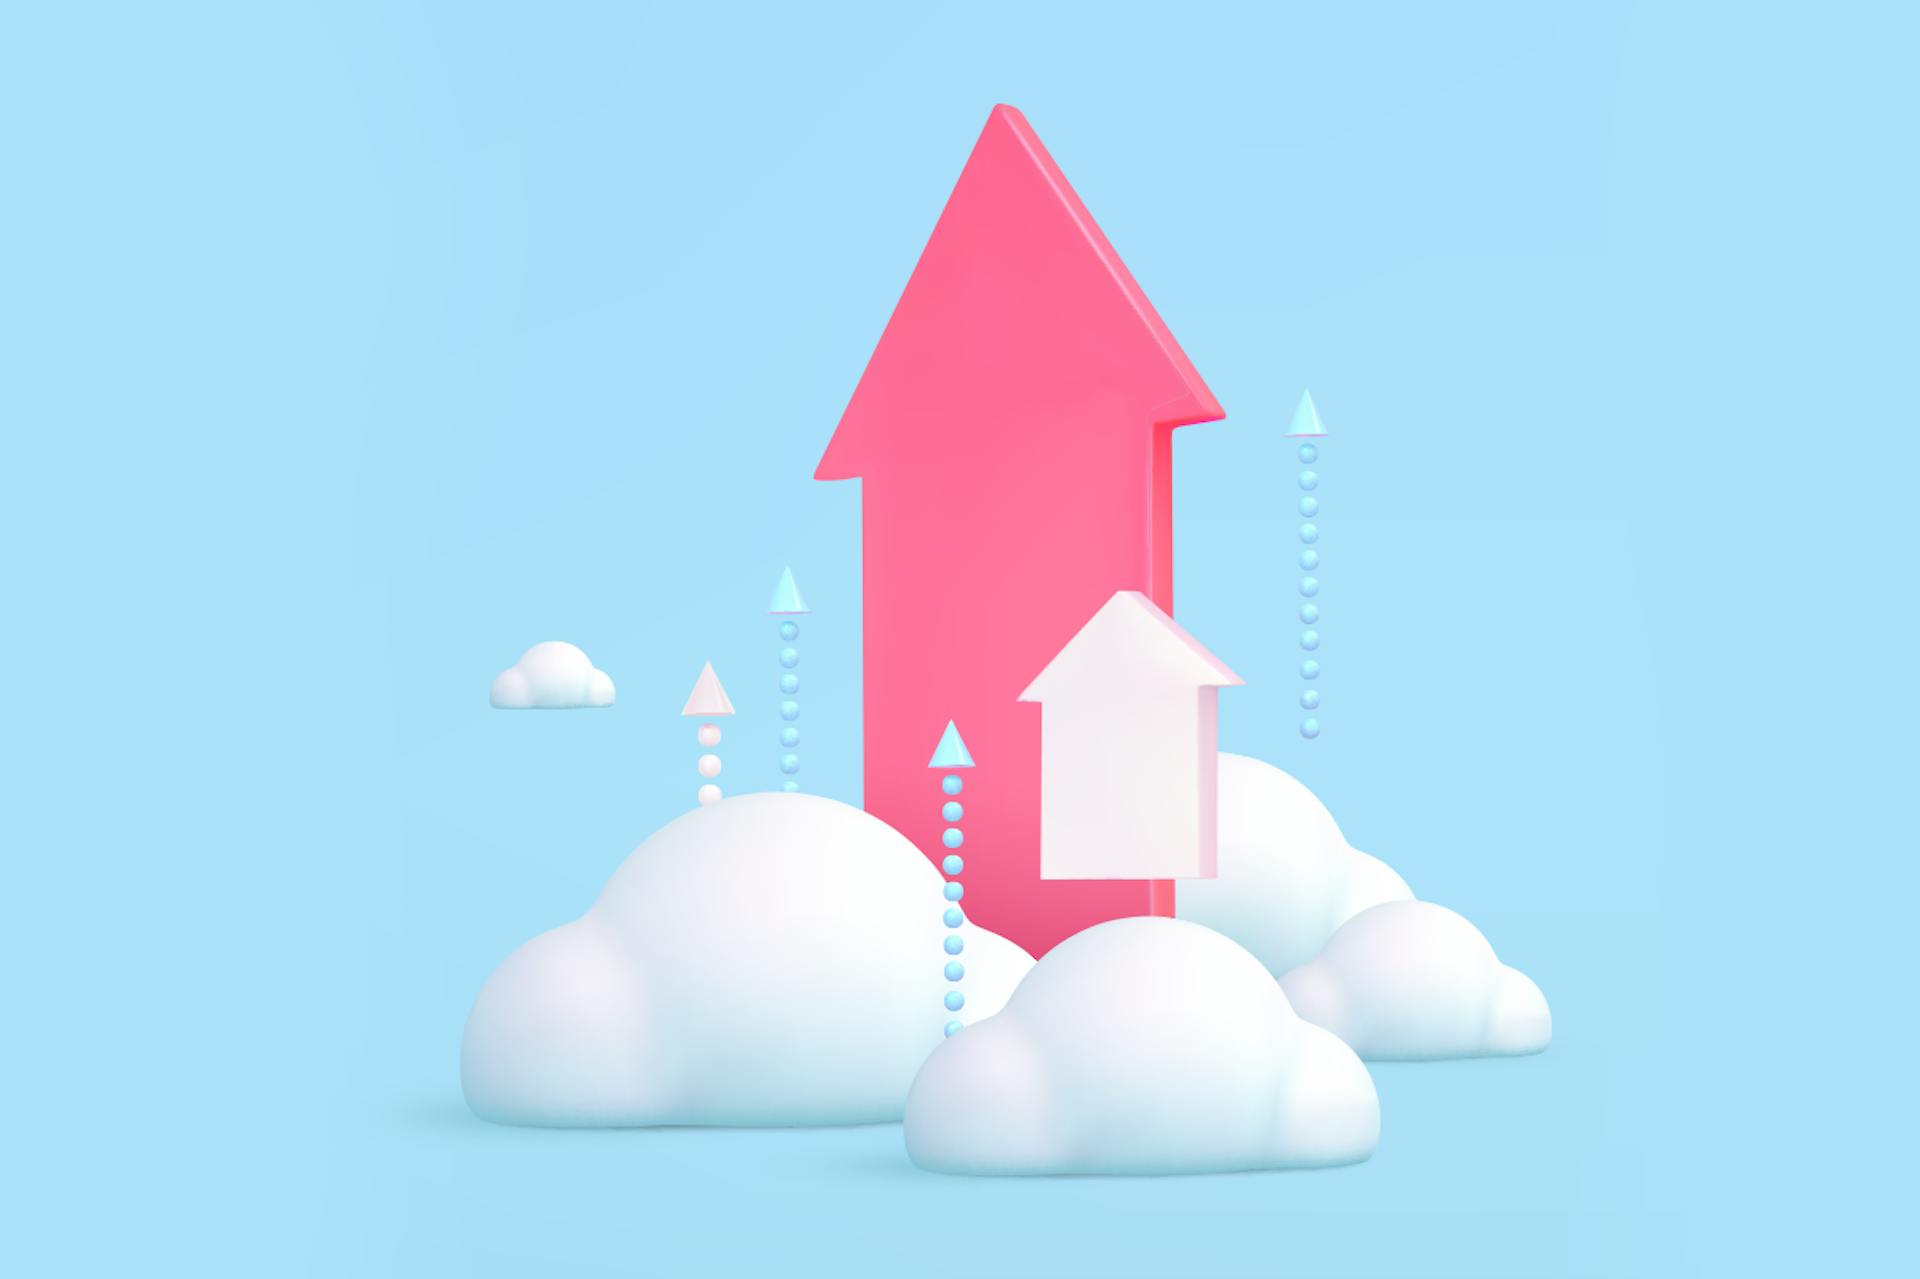 Image showing a large pink arrow surrounded by smaller arrows and clouds on a pale blue background.  Twitter impressions and reach blog post guide.